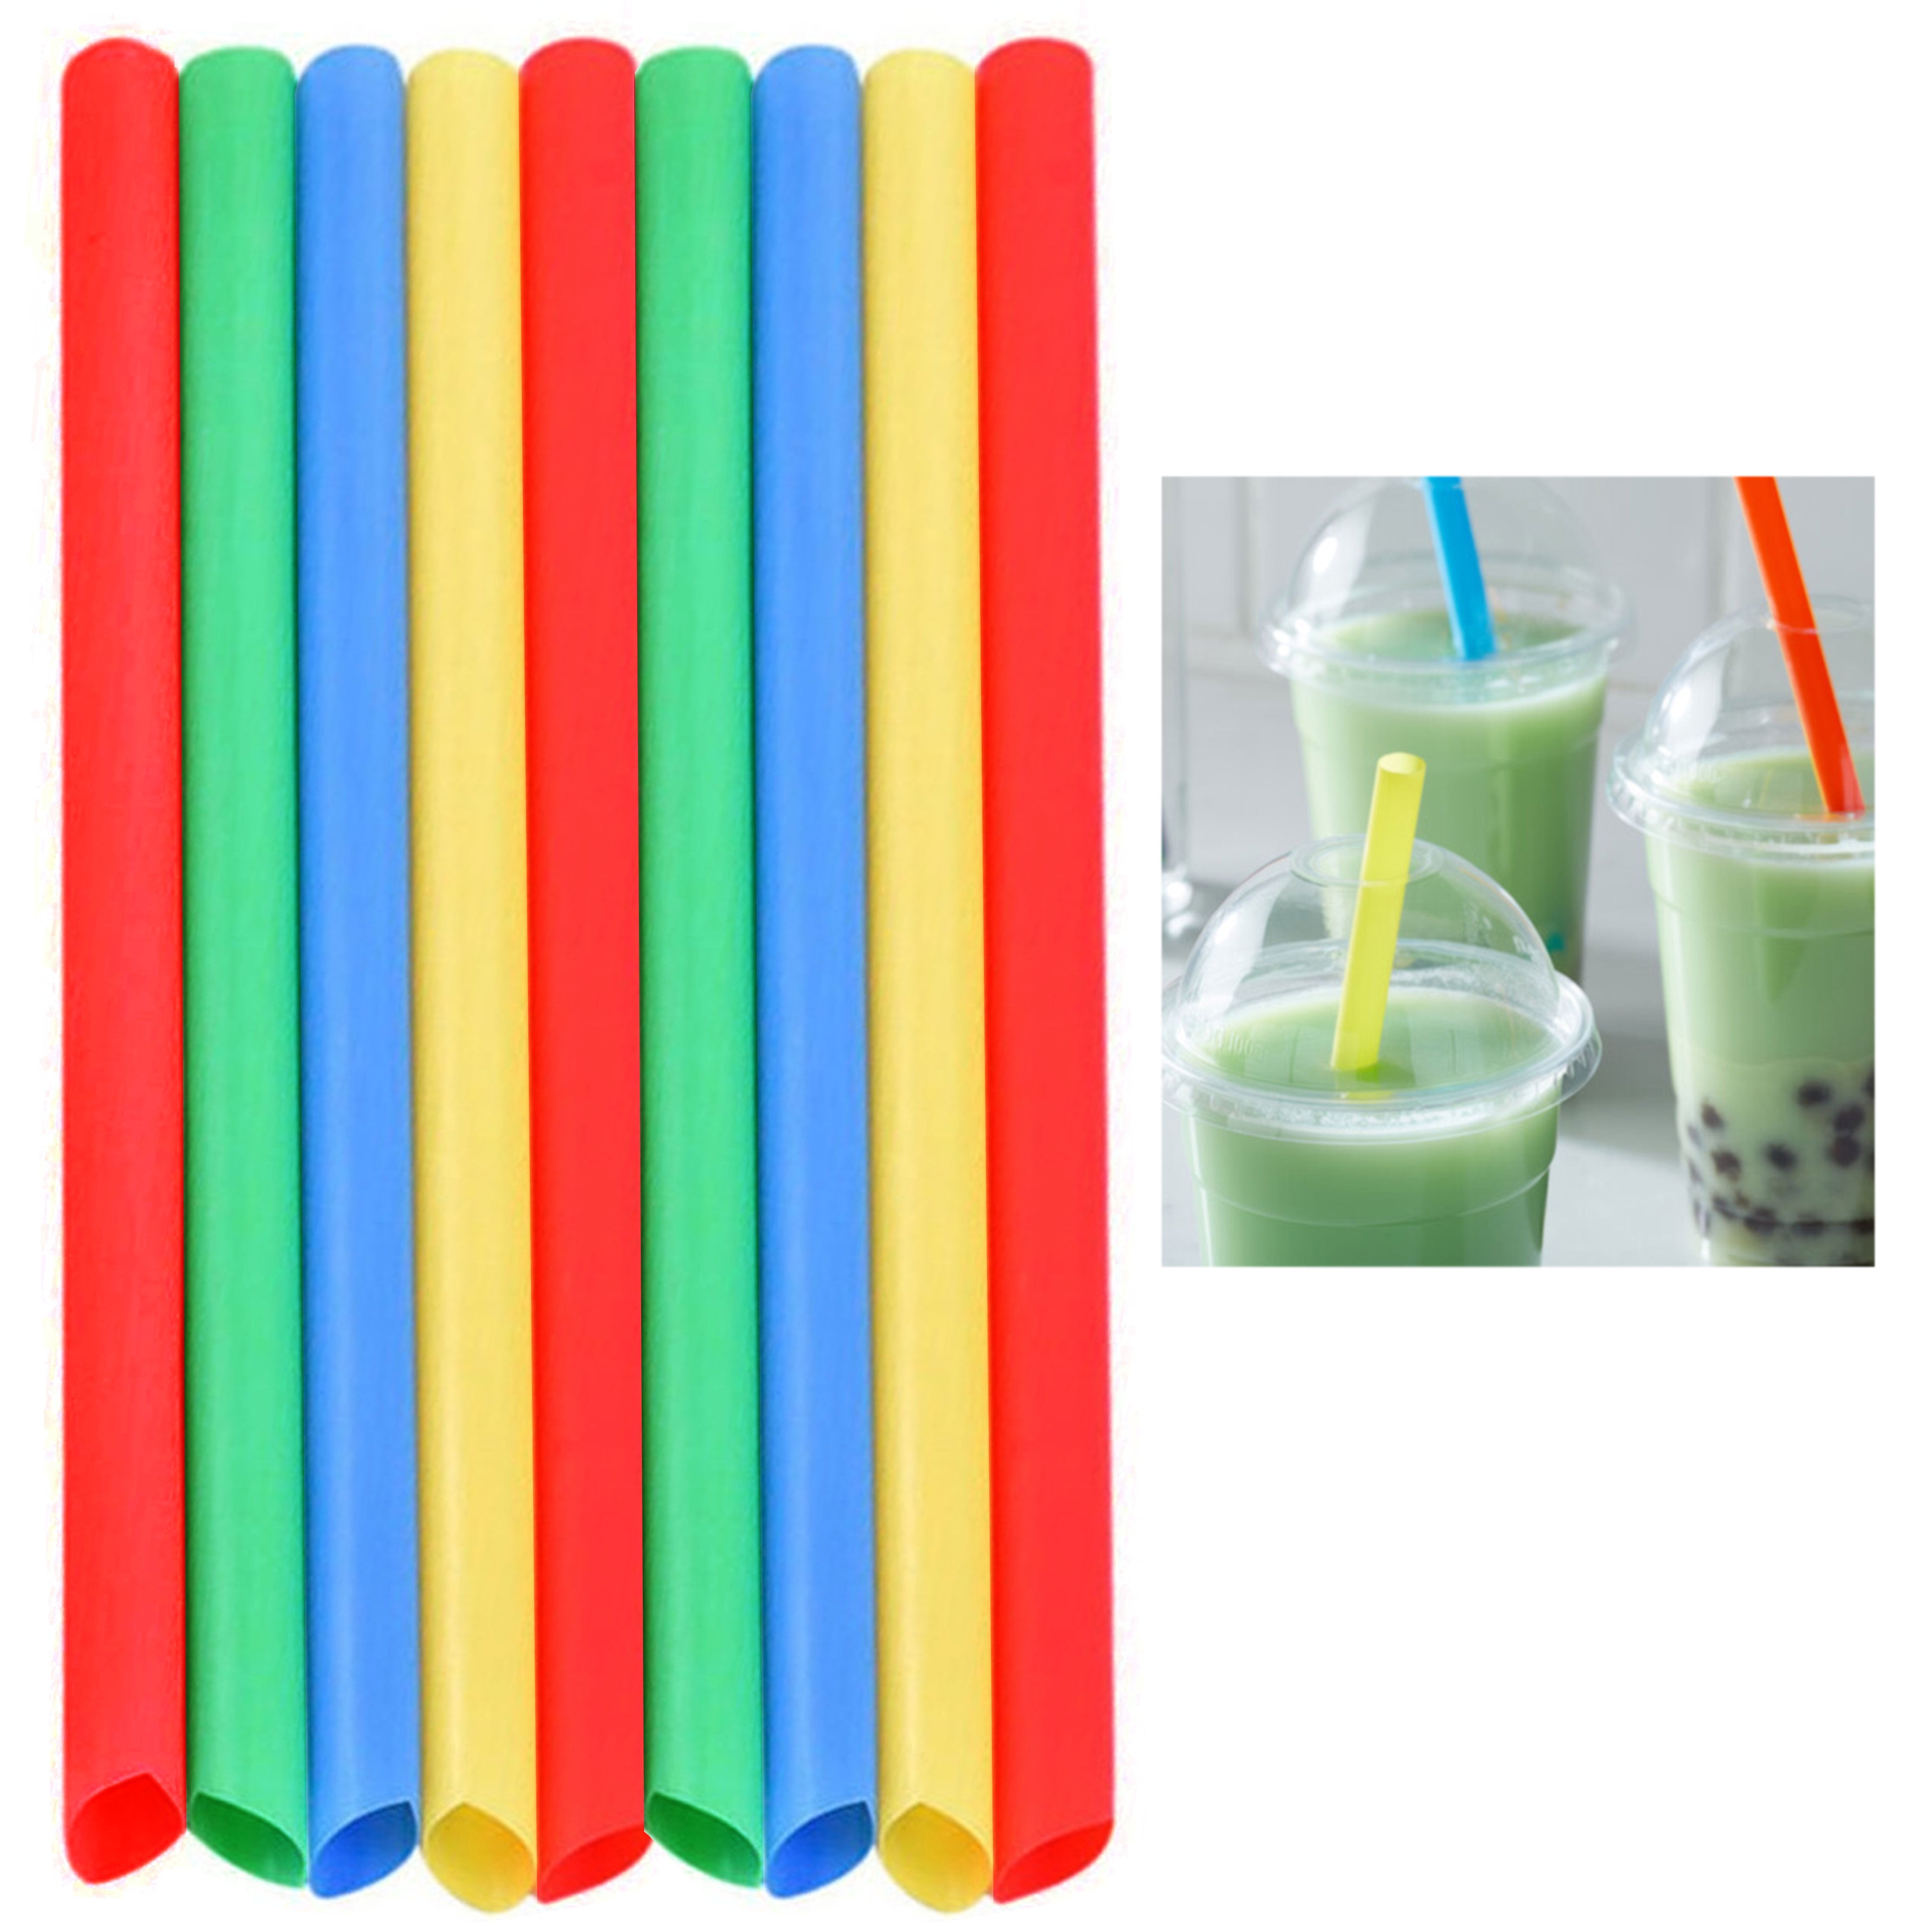 Extra Wide 0.51 inches Reusable Hard Smoothie Straws, Great for Bubble Tea,  Boba Tea Milkshakes,10.25 Inches Long, 8 Pieces Jumbo Eco-Friendly Plastic